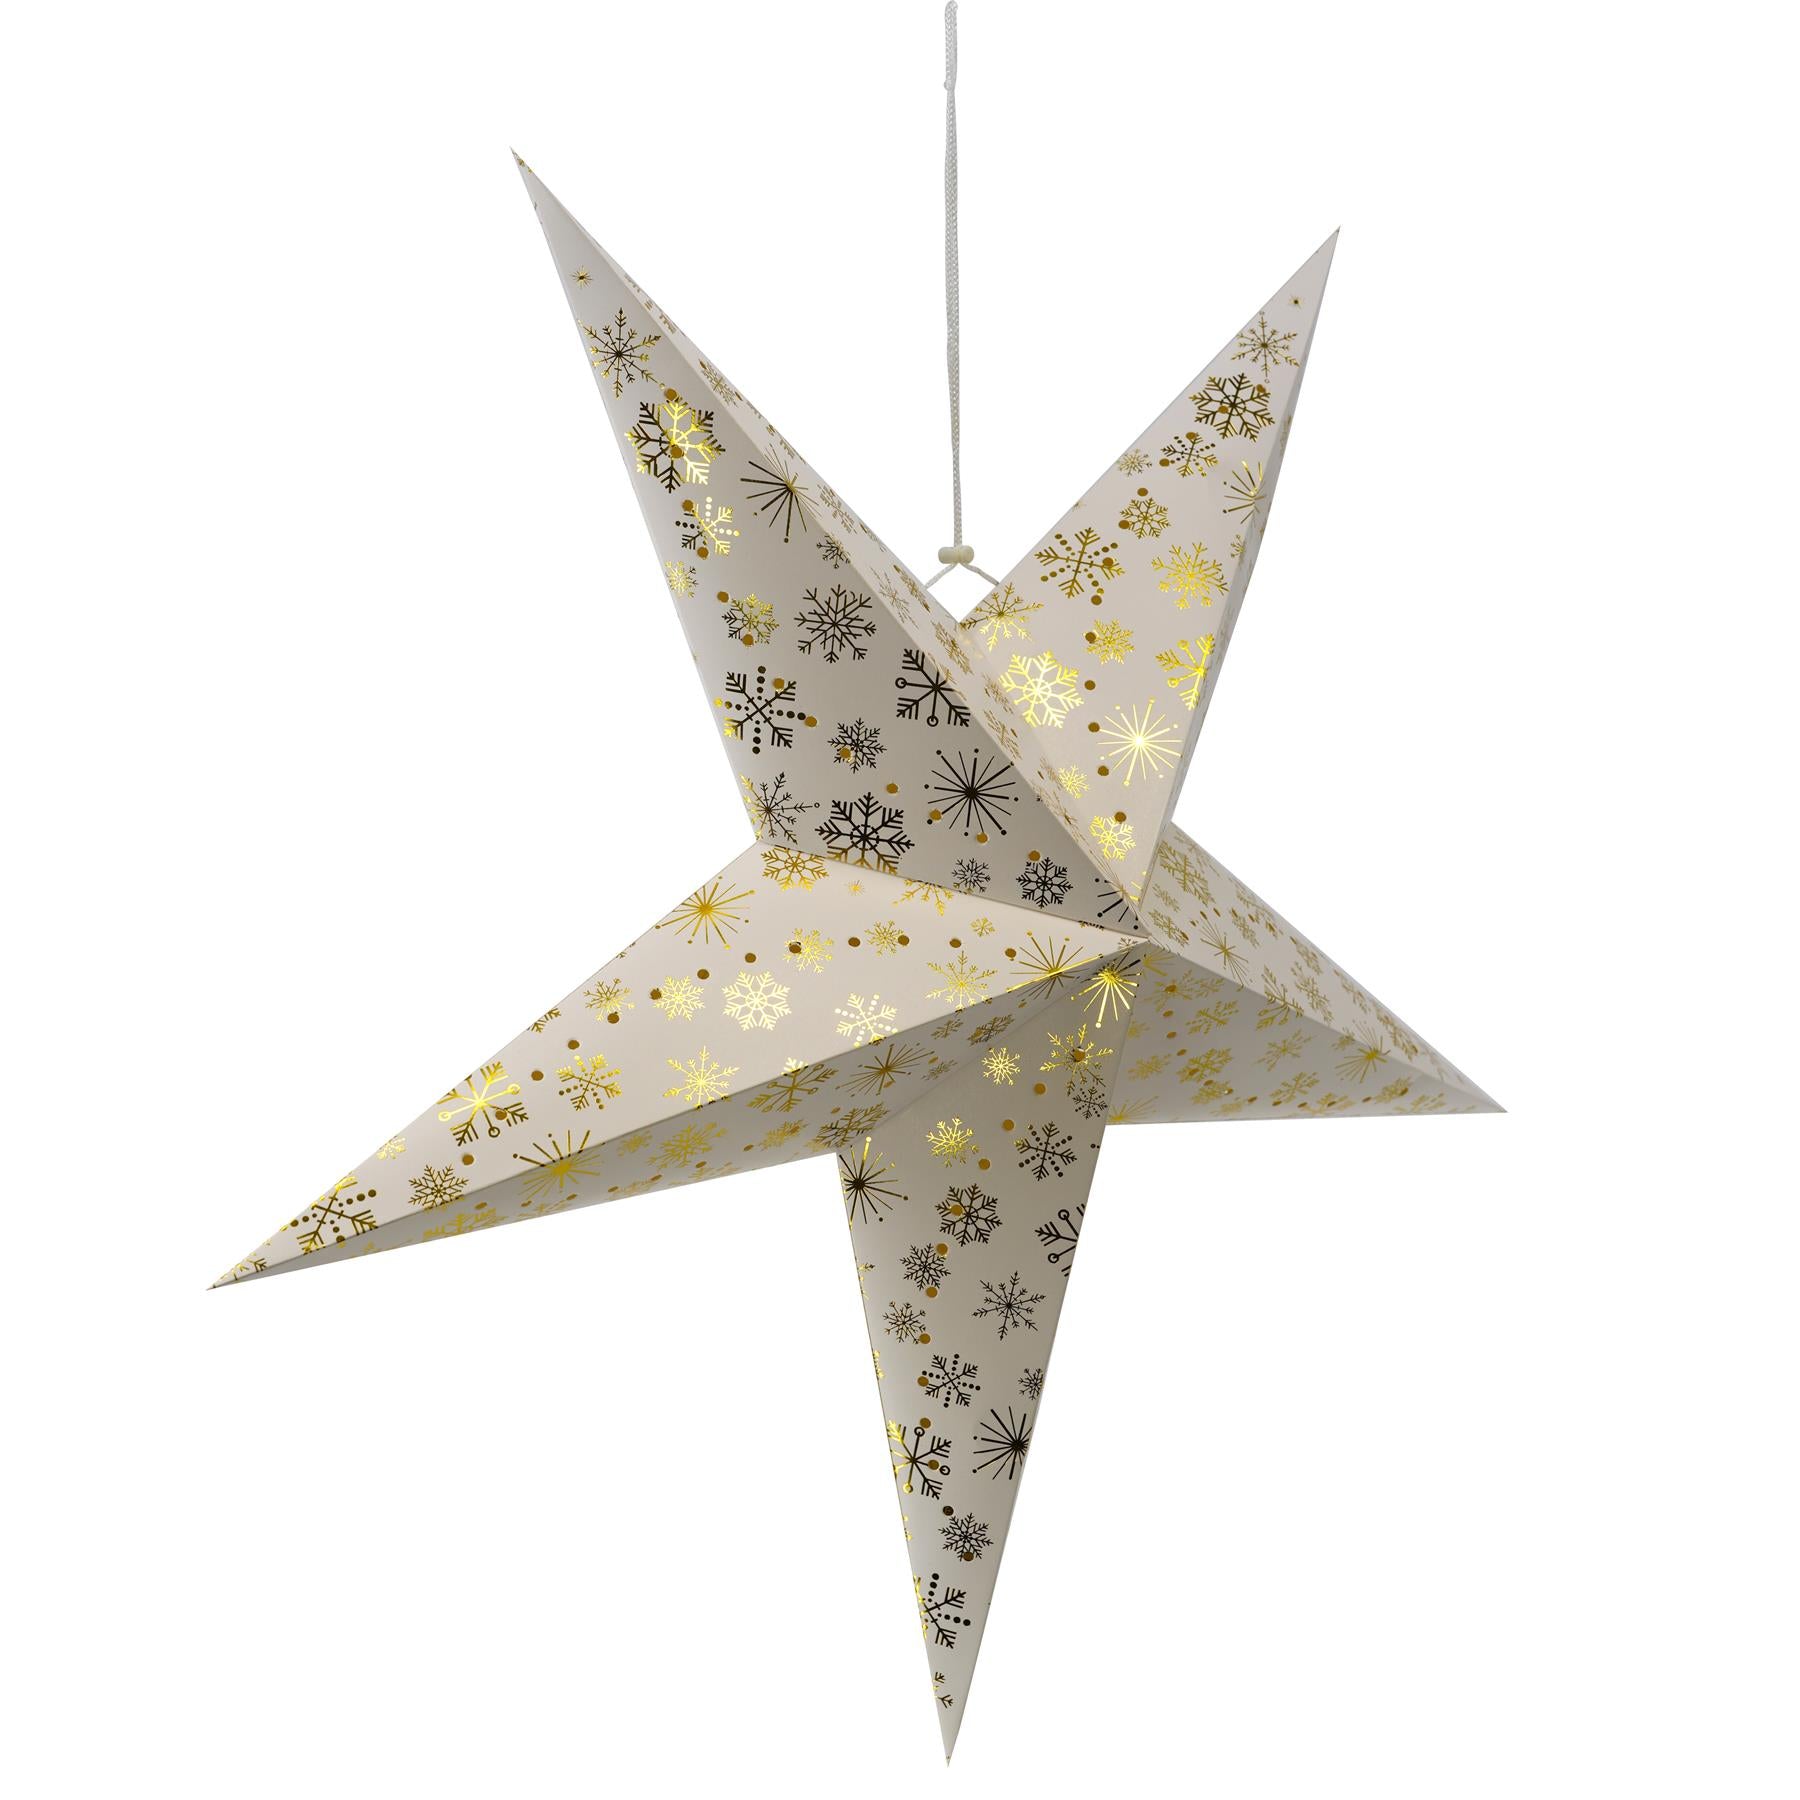 75 cm LED Hanging Paper Star Lantern by Geezy - UKBuyZone